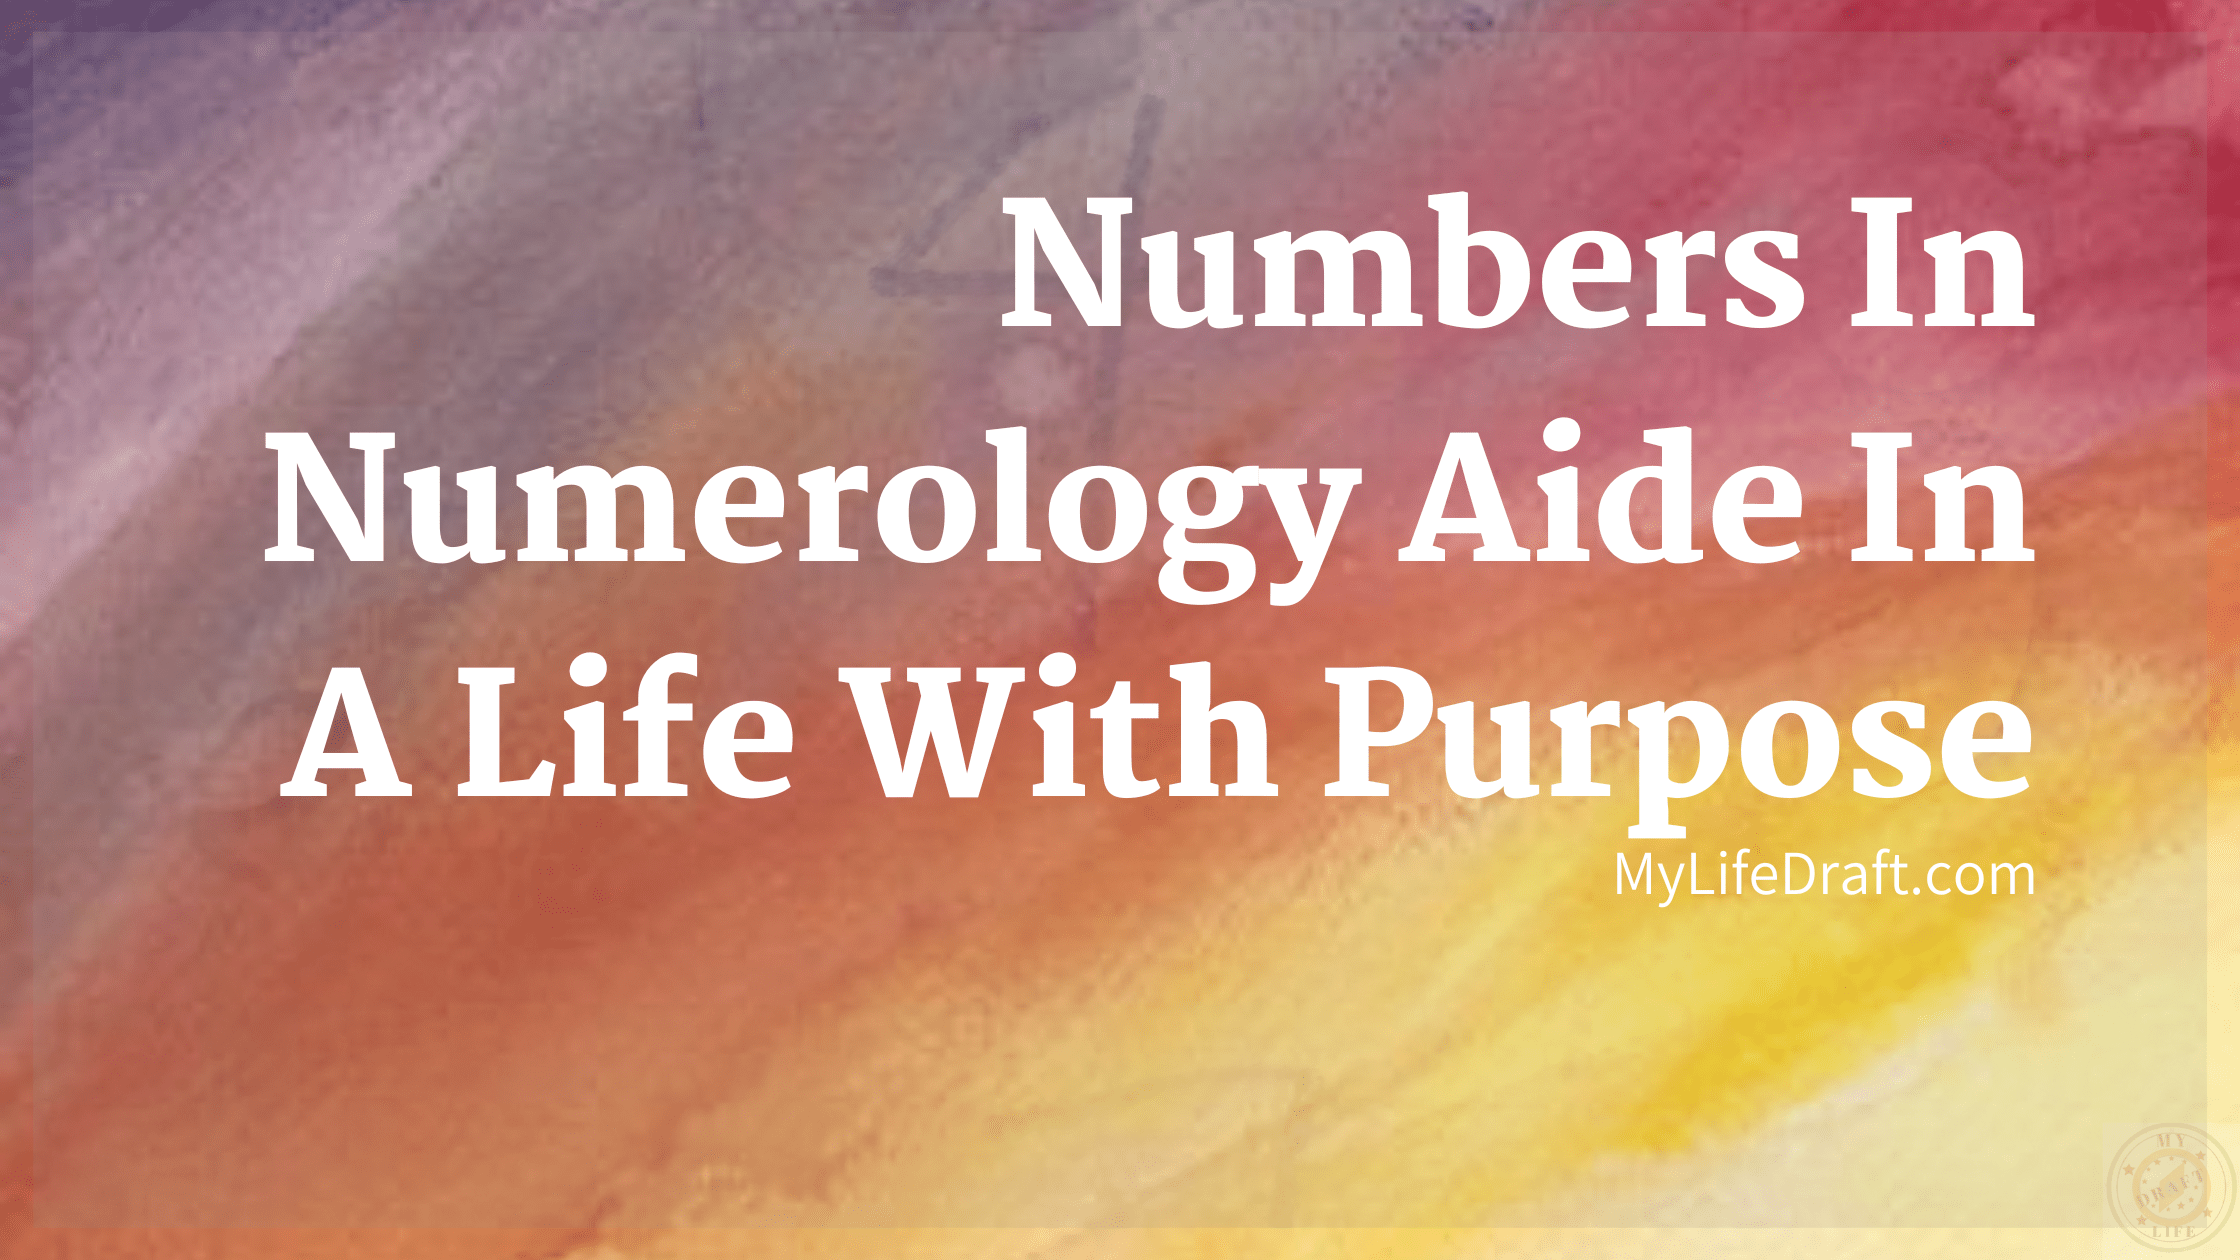 Numbers In Numerology Aide In A Life With Purpose